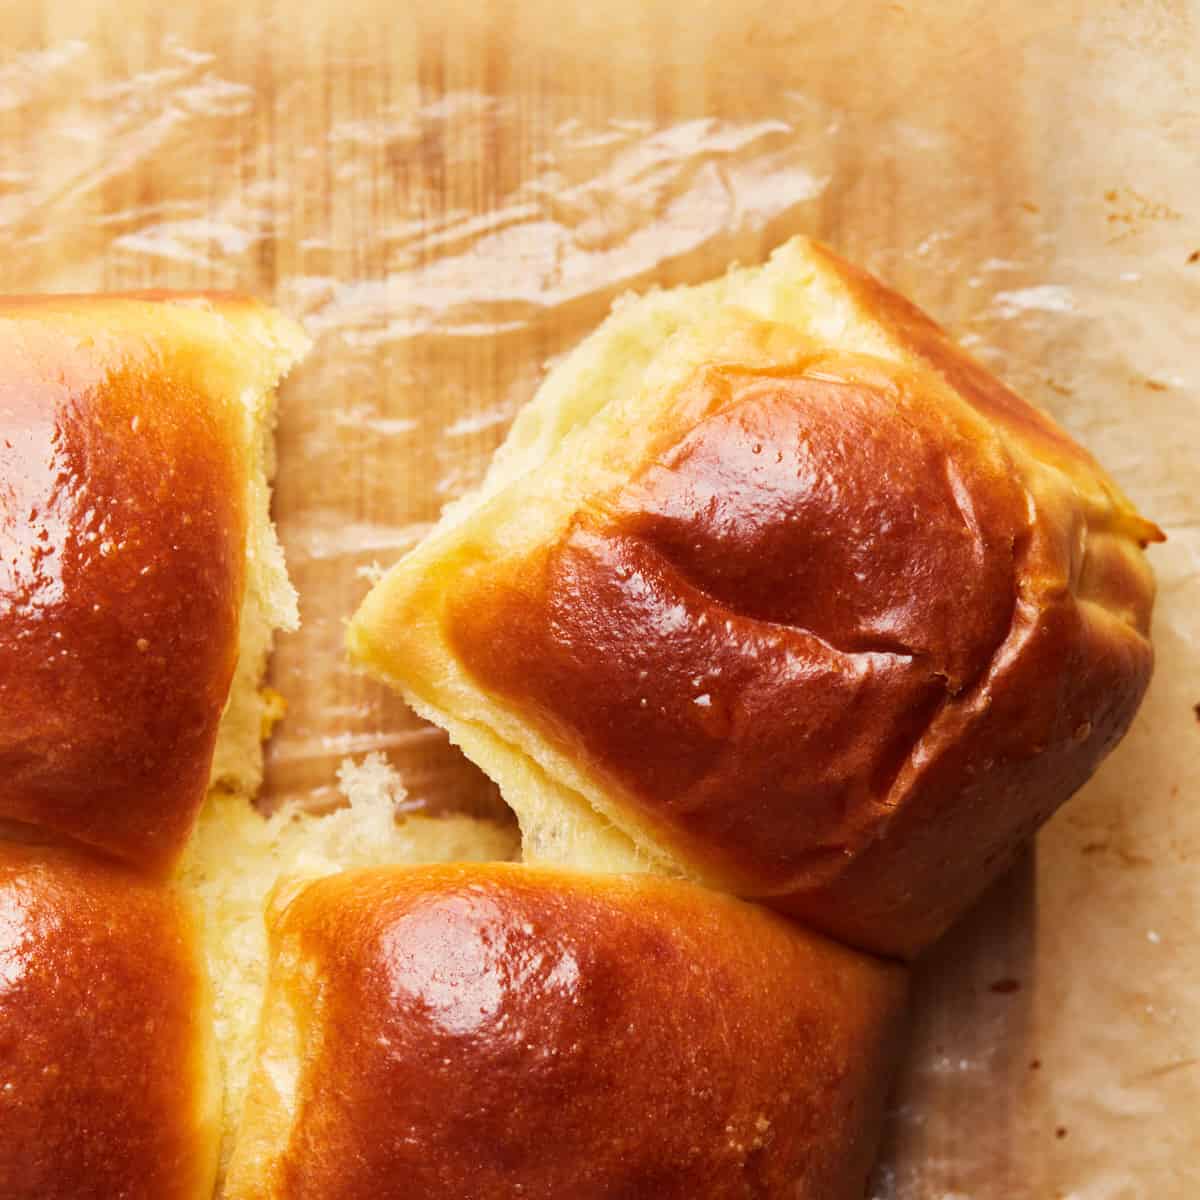 Top down view of a dinner roll on baking paper